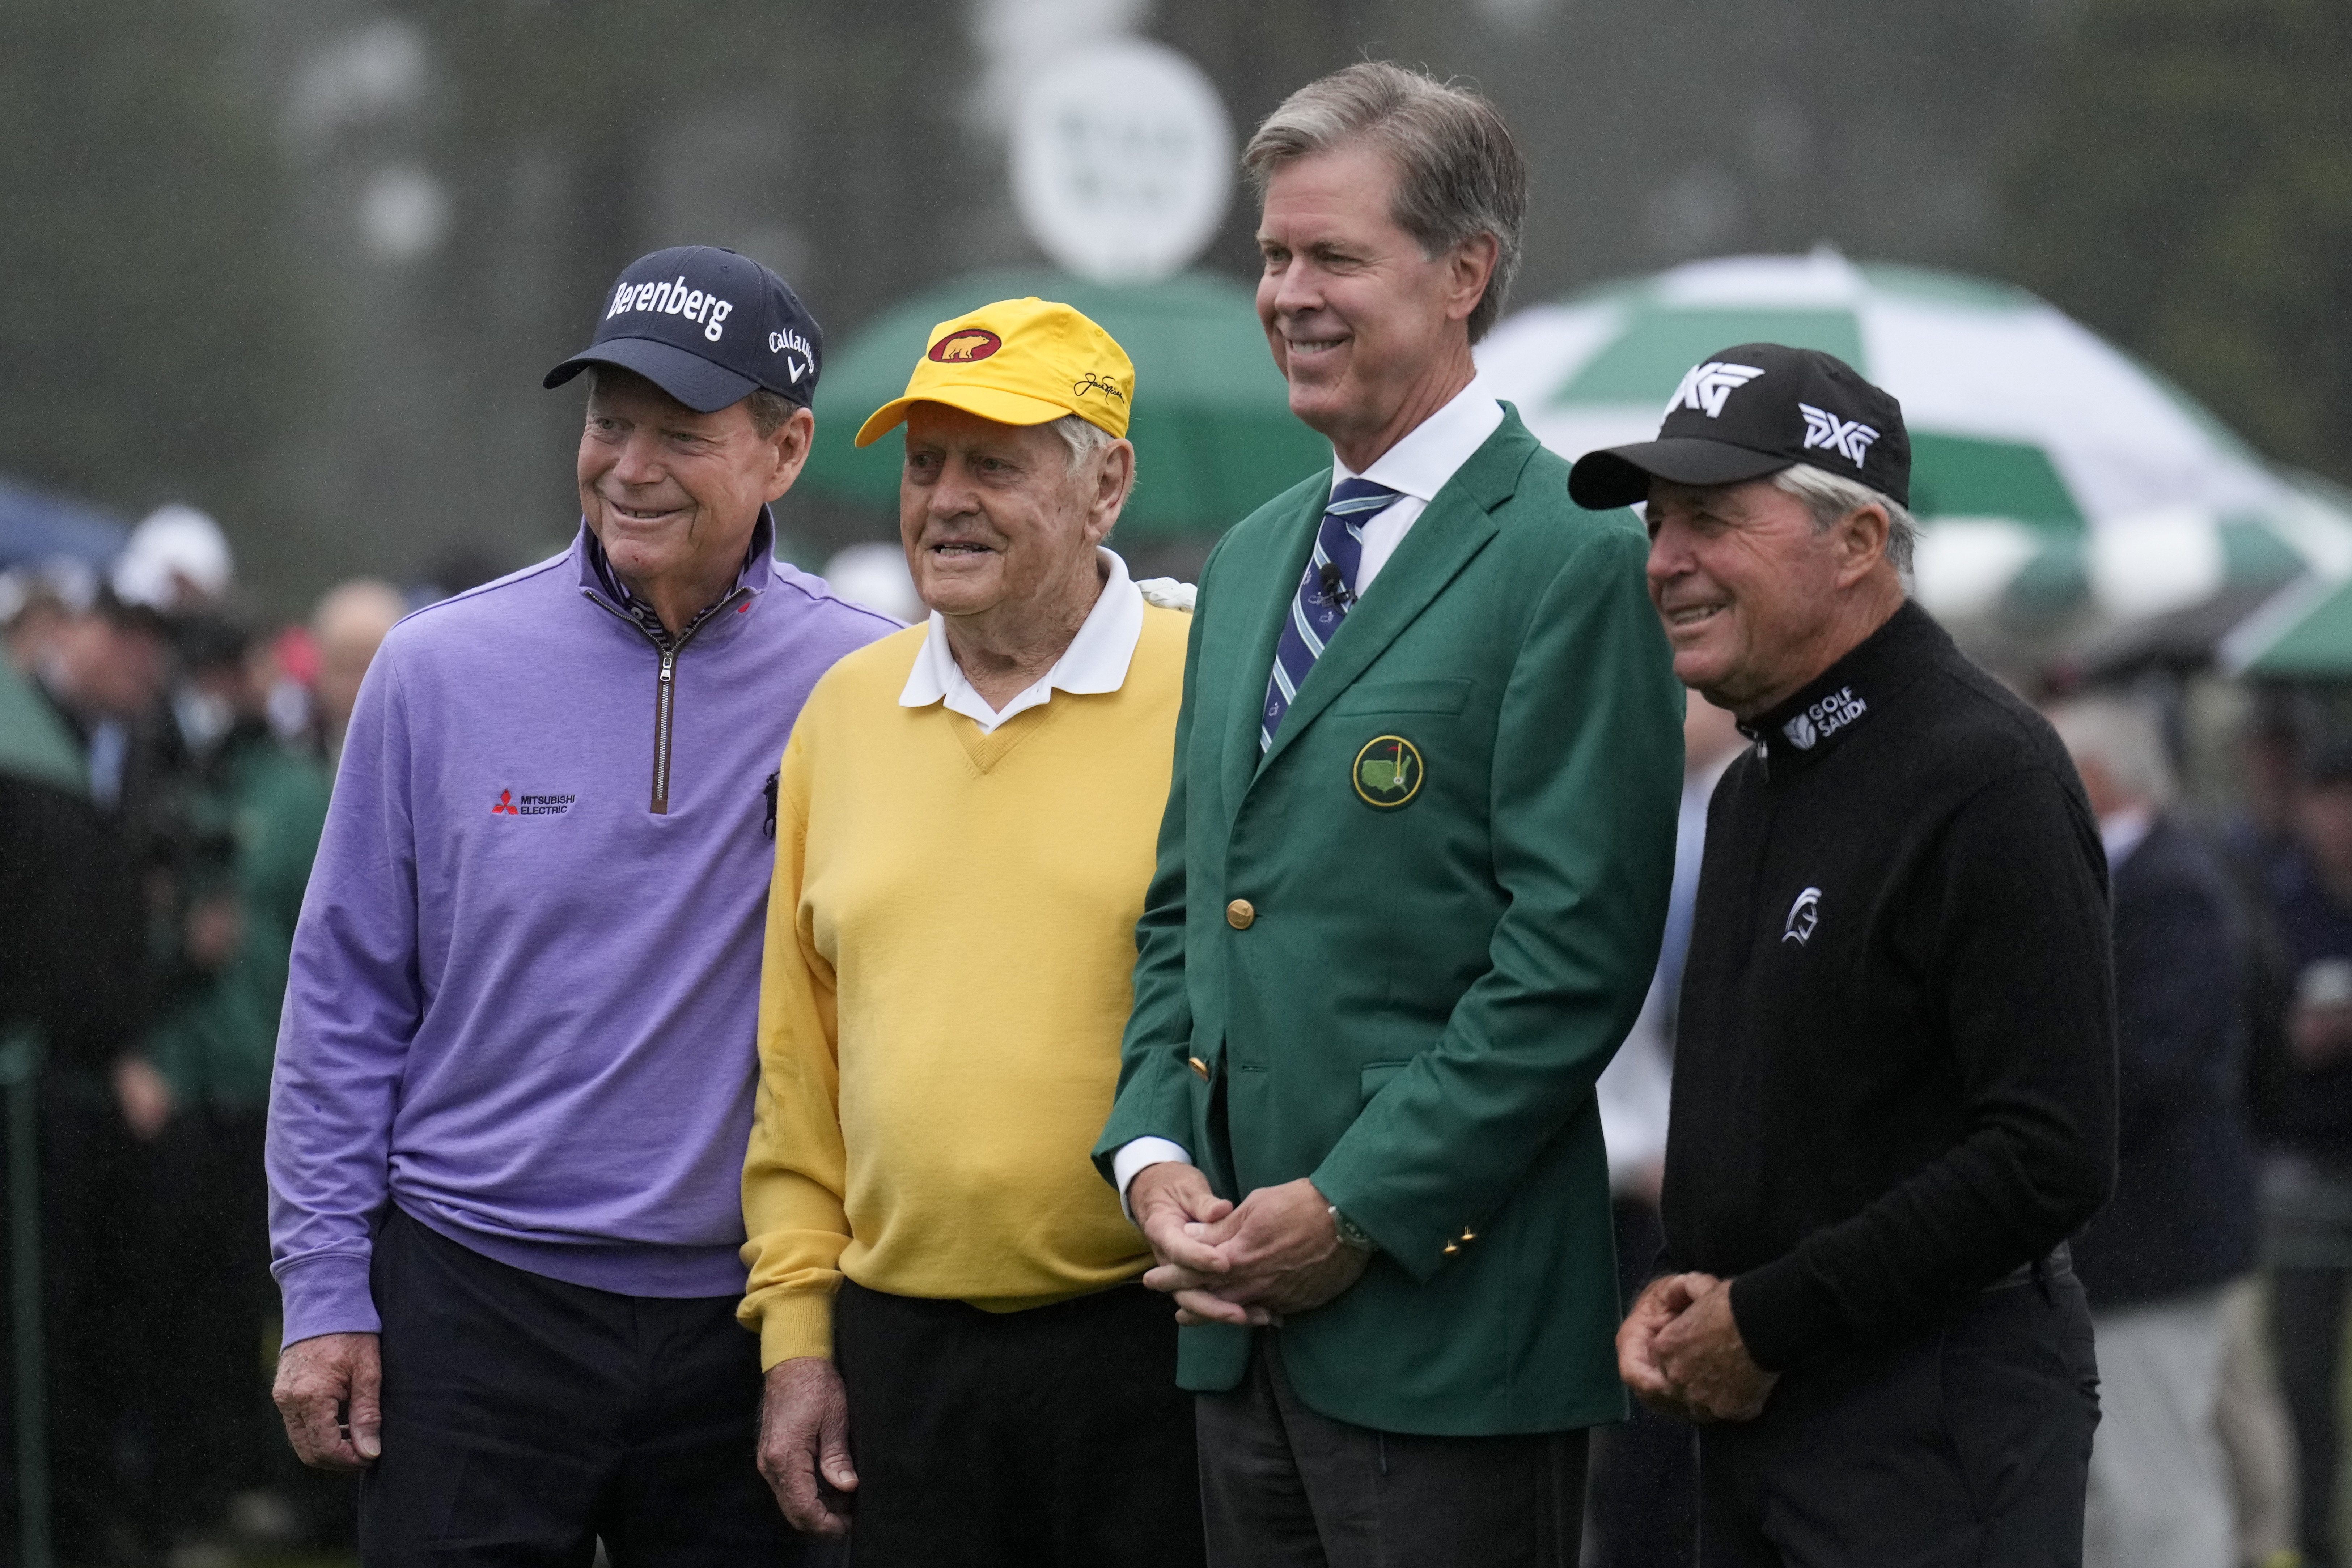 Jack Nicklaus says he will vote for indicted former President Donald Trump again, Netflix star Brooks Koepka leads